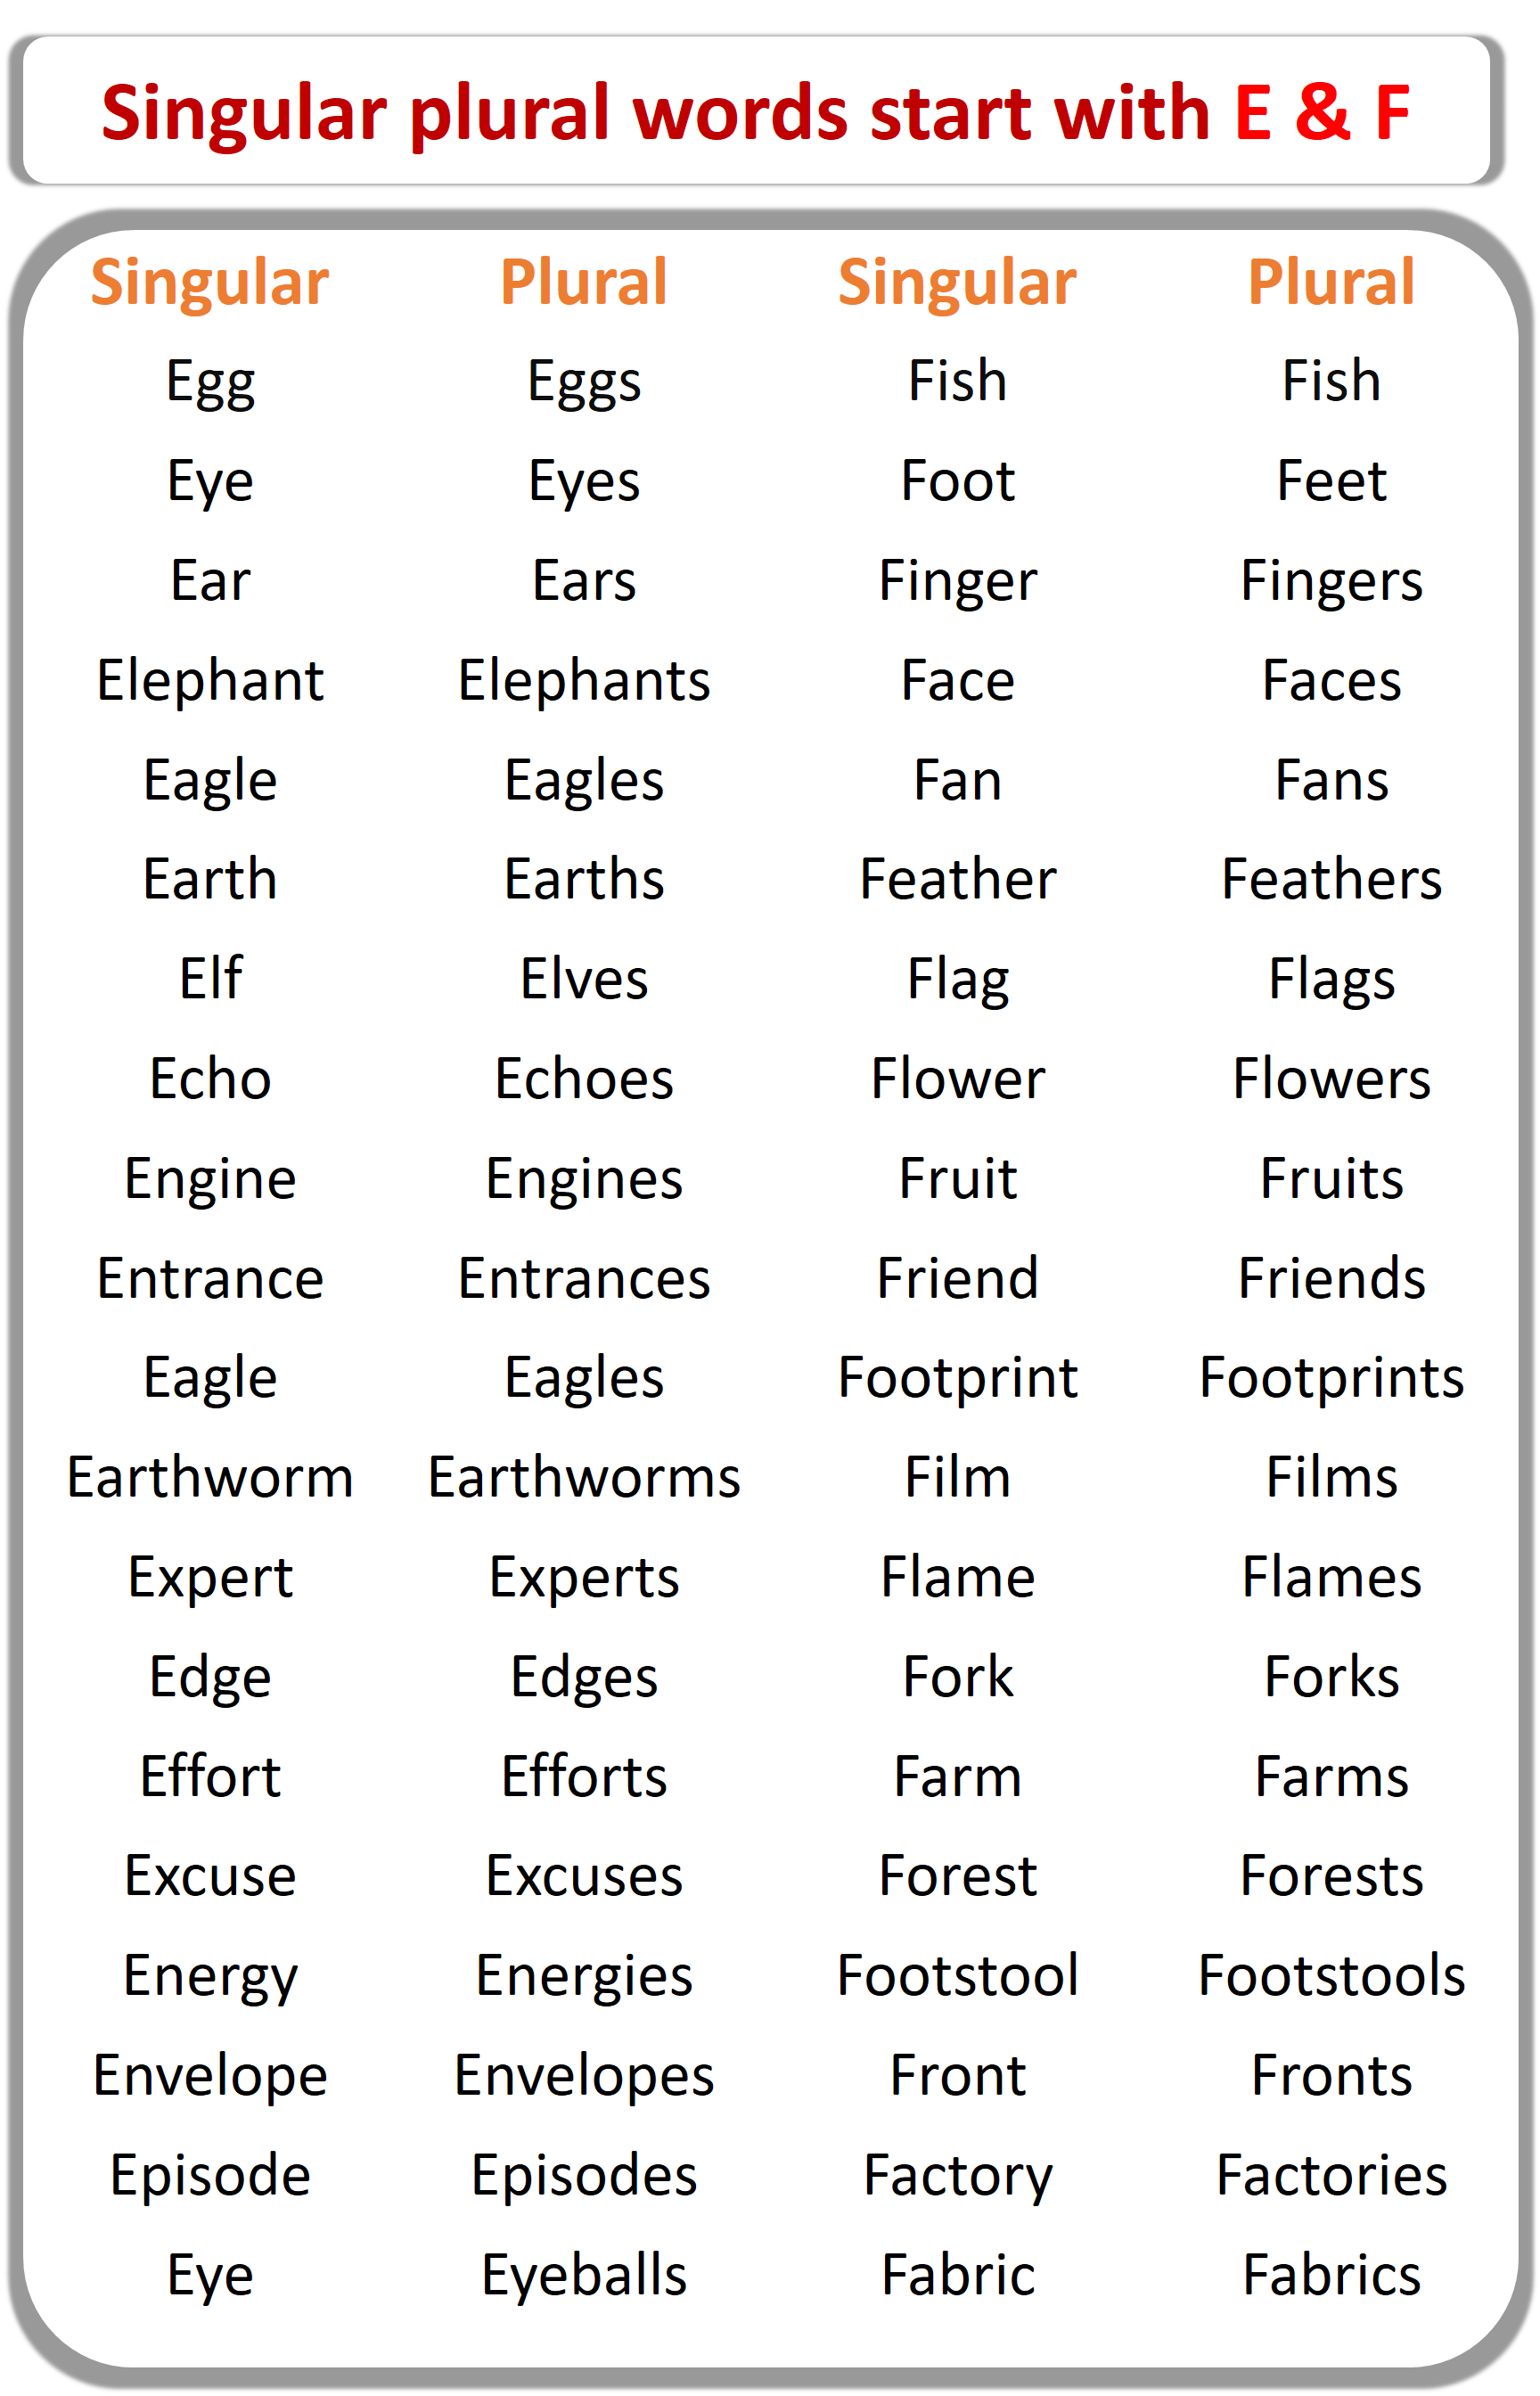 Singular Plural Words List From A to Z | E & F